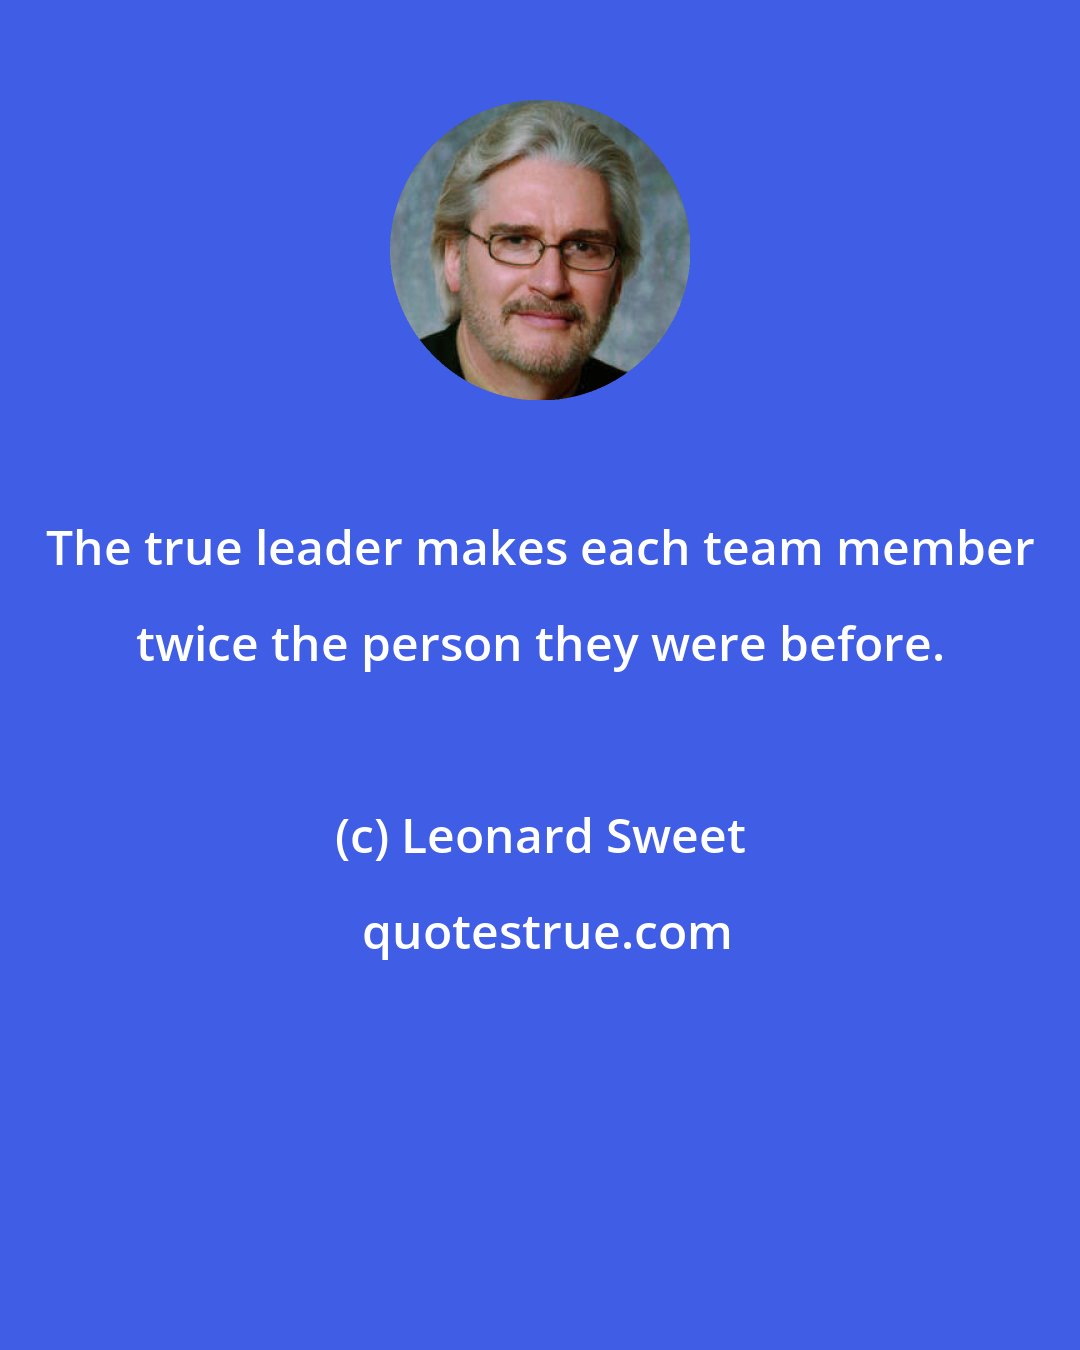 Leonard Sweet: The true leader makes each team member twice the person they were before.